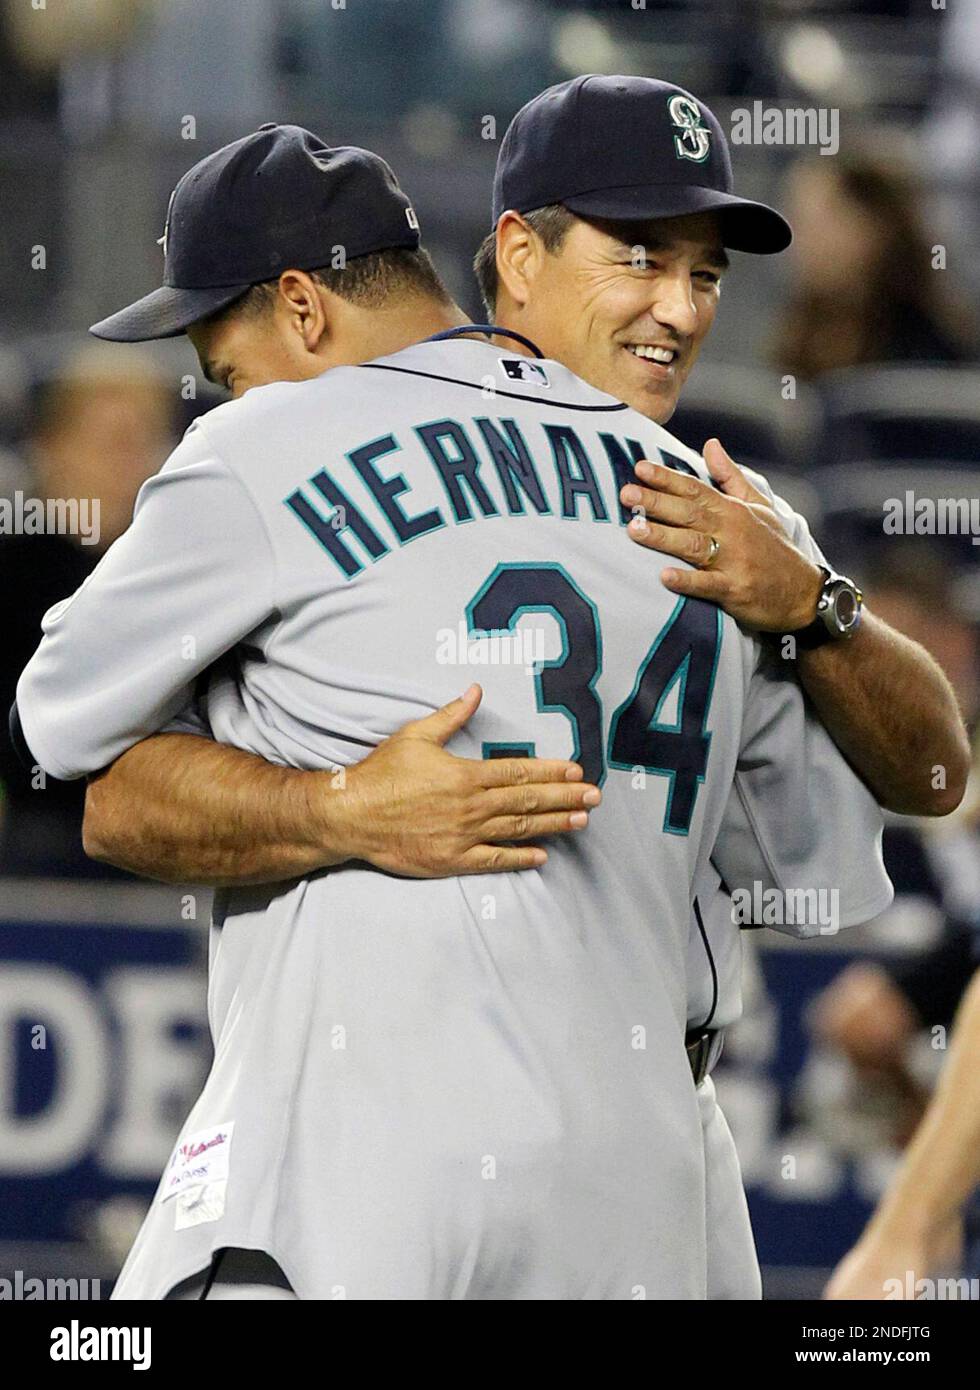 Seattle Mariners' Felix Hernandez, left, hugs manager Don Wakamatsu after  the baseball game against the New York Yankees Wednesday, June 30, 2010, at  Yankee Stadium in New York. Hernandez pitched a complete